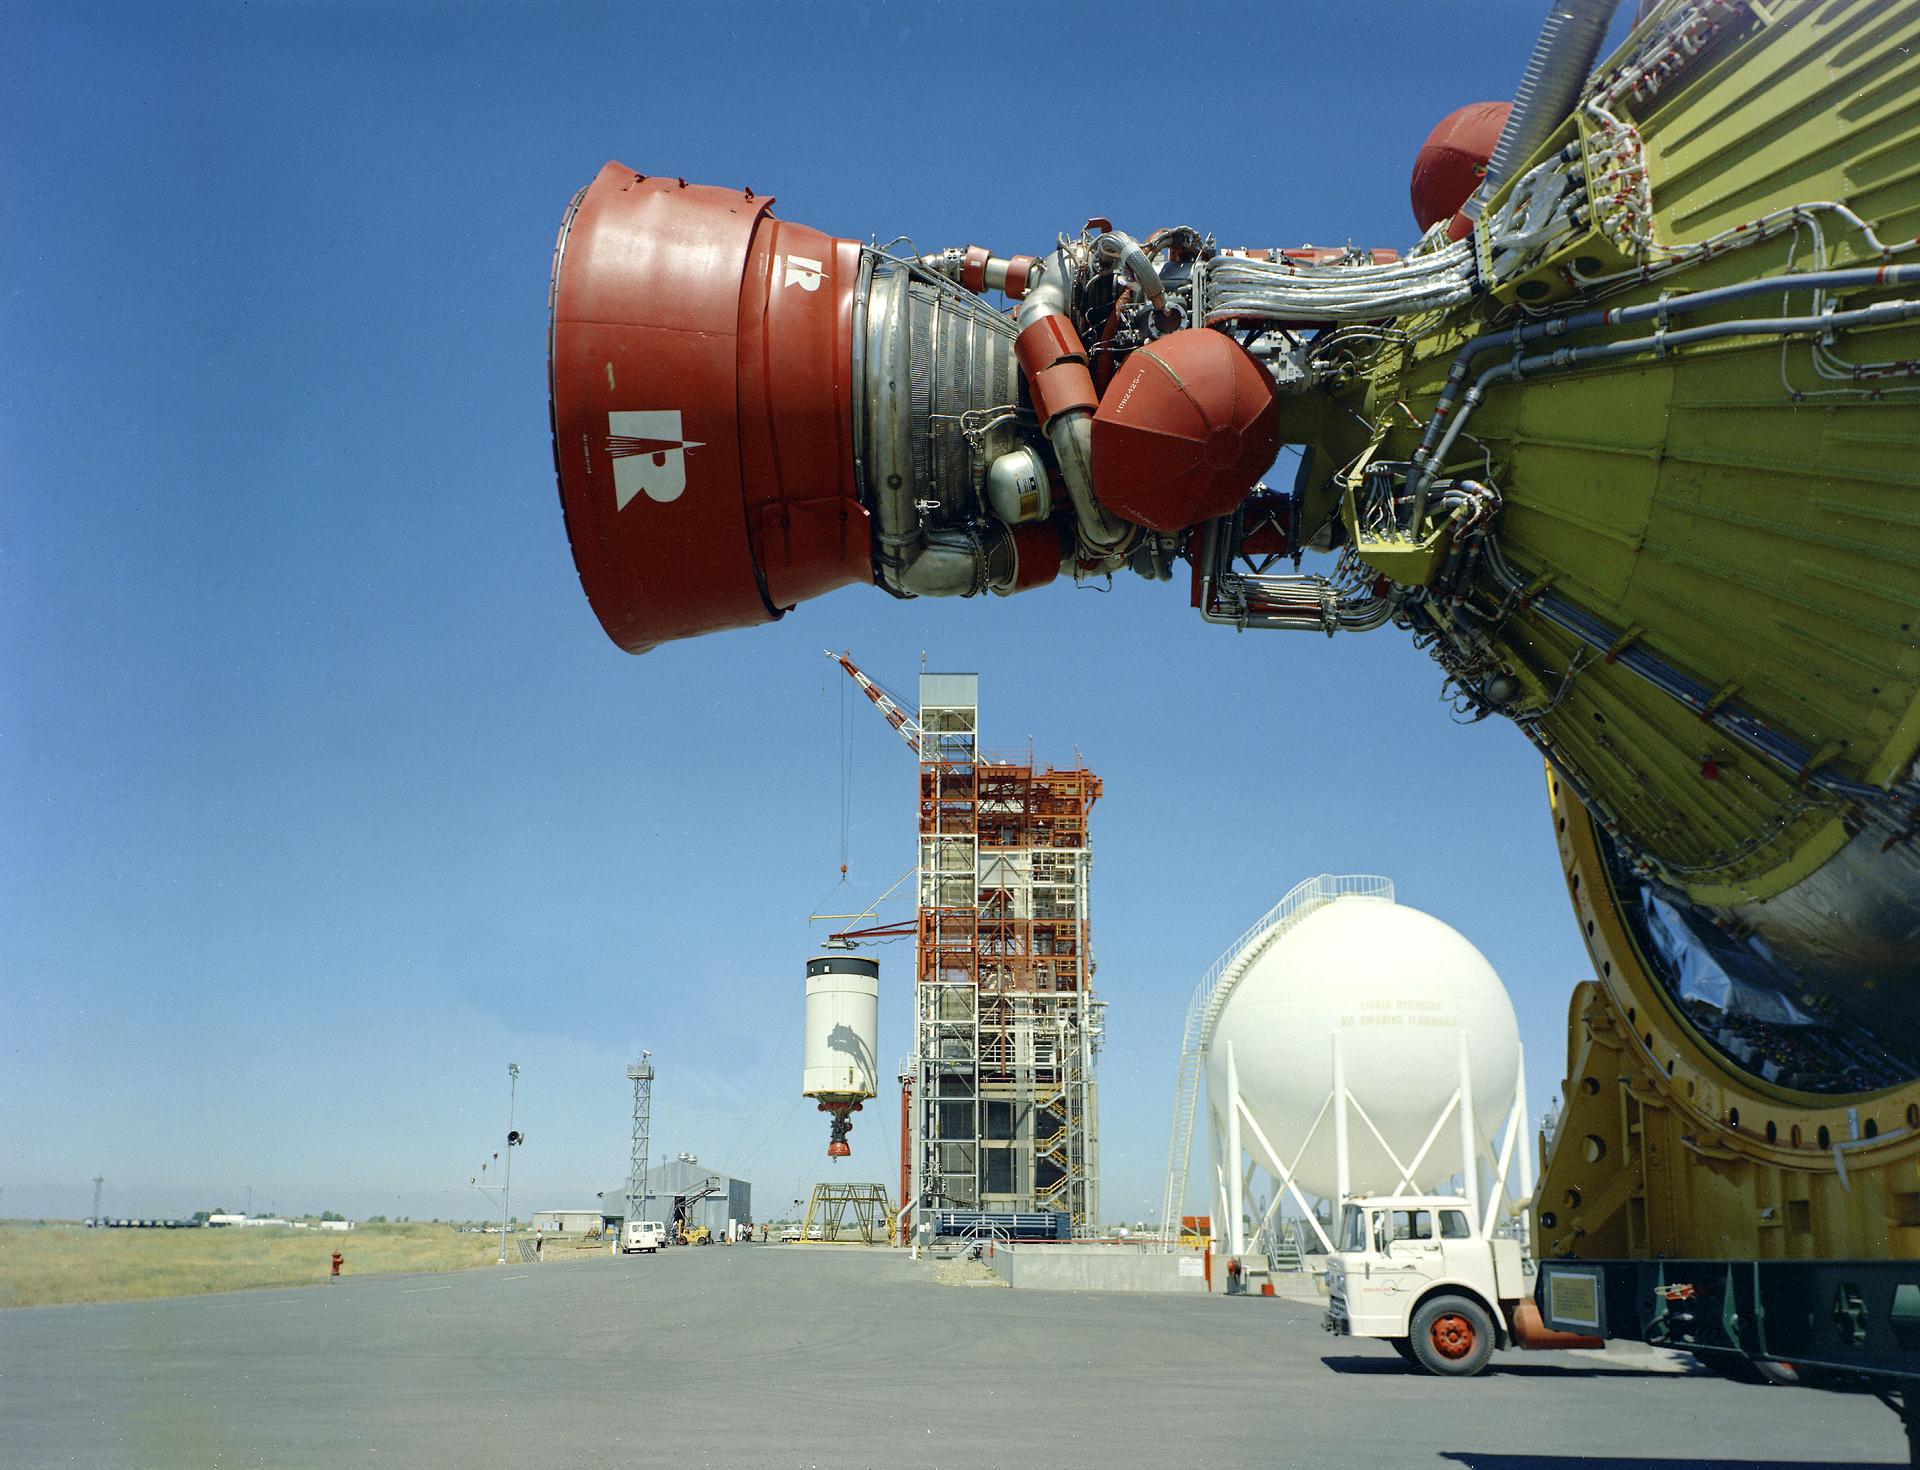 Two S-IVB stages at SACTO at the same time. The stage in the foreground was used in the Apollo-Soyuz Test Project backup vehicle. It was never flown and is now on display at Kennedy Space Center on a Saturn IB. In the background, the Apollo 9 third stage is being installed in Beta Test Stand 1 for launch. (Source: NASA)